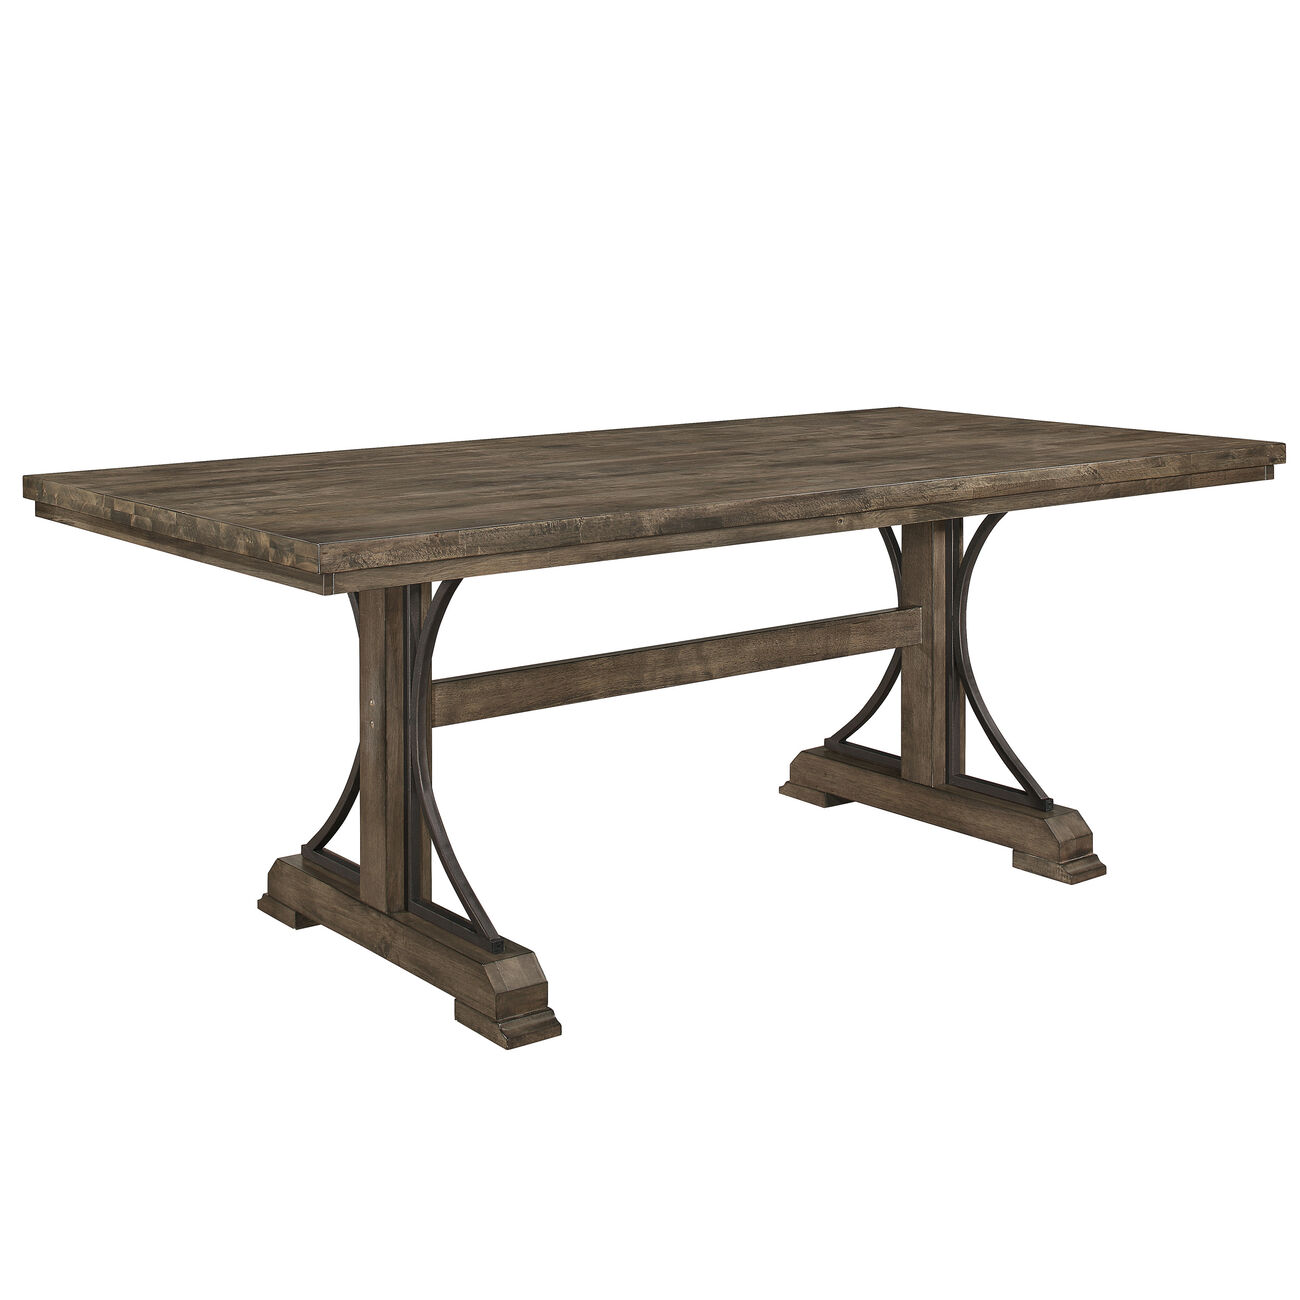 Wooden Dining Table with Trestle Base and Plank Design, Brown